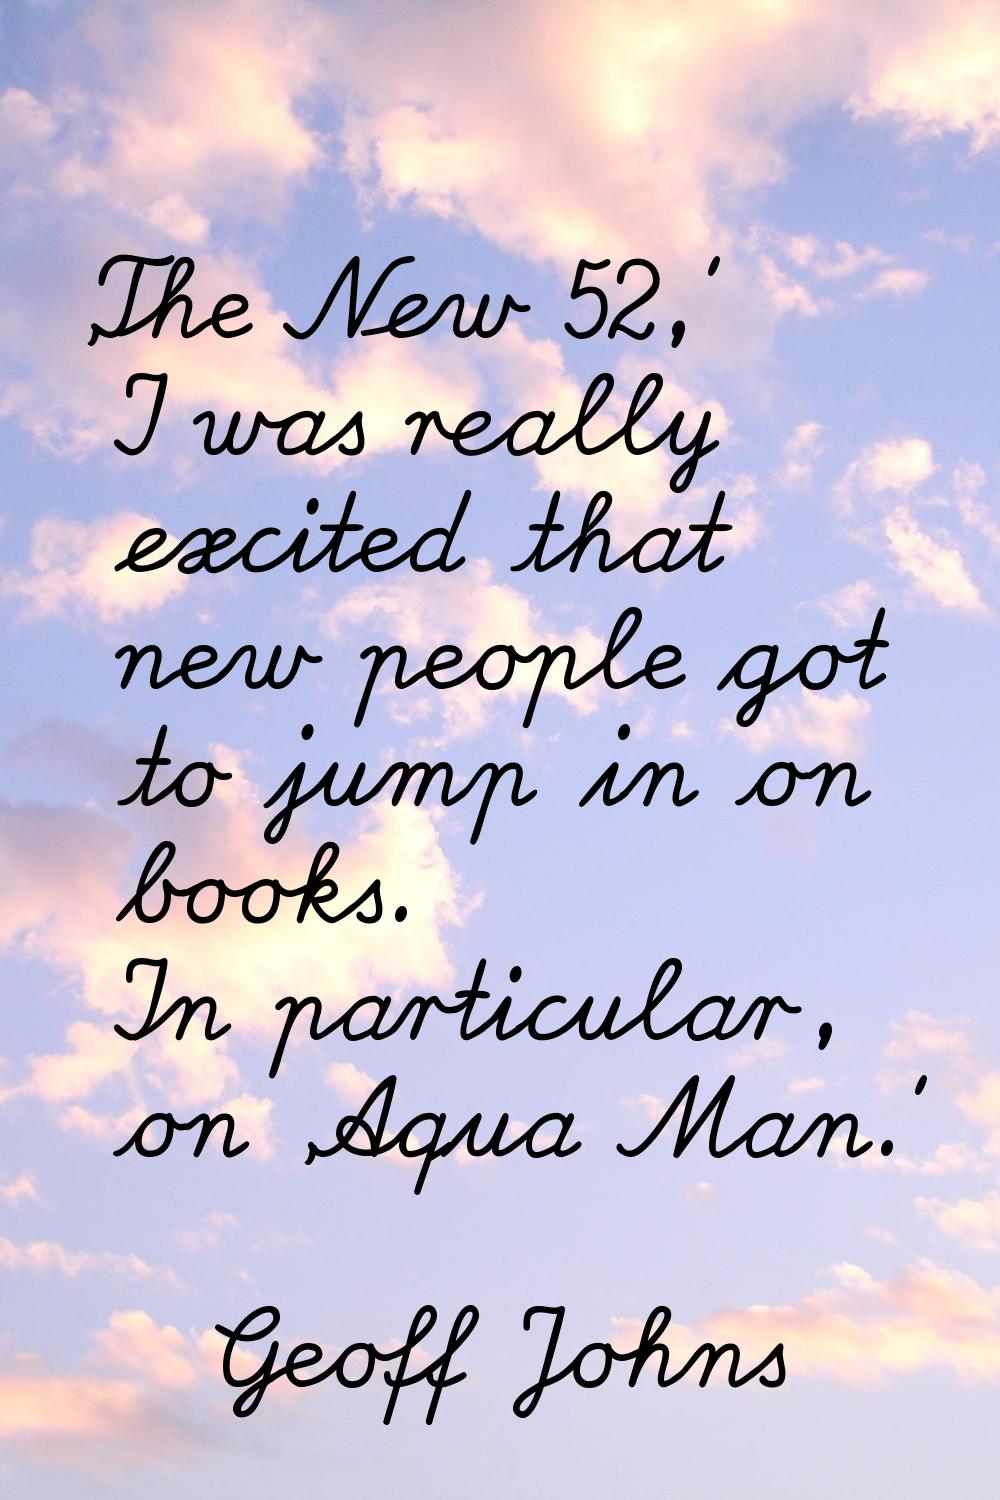 'The New 52,' I was really excited that new people got to jump in on books. In particular, on 'Aqua